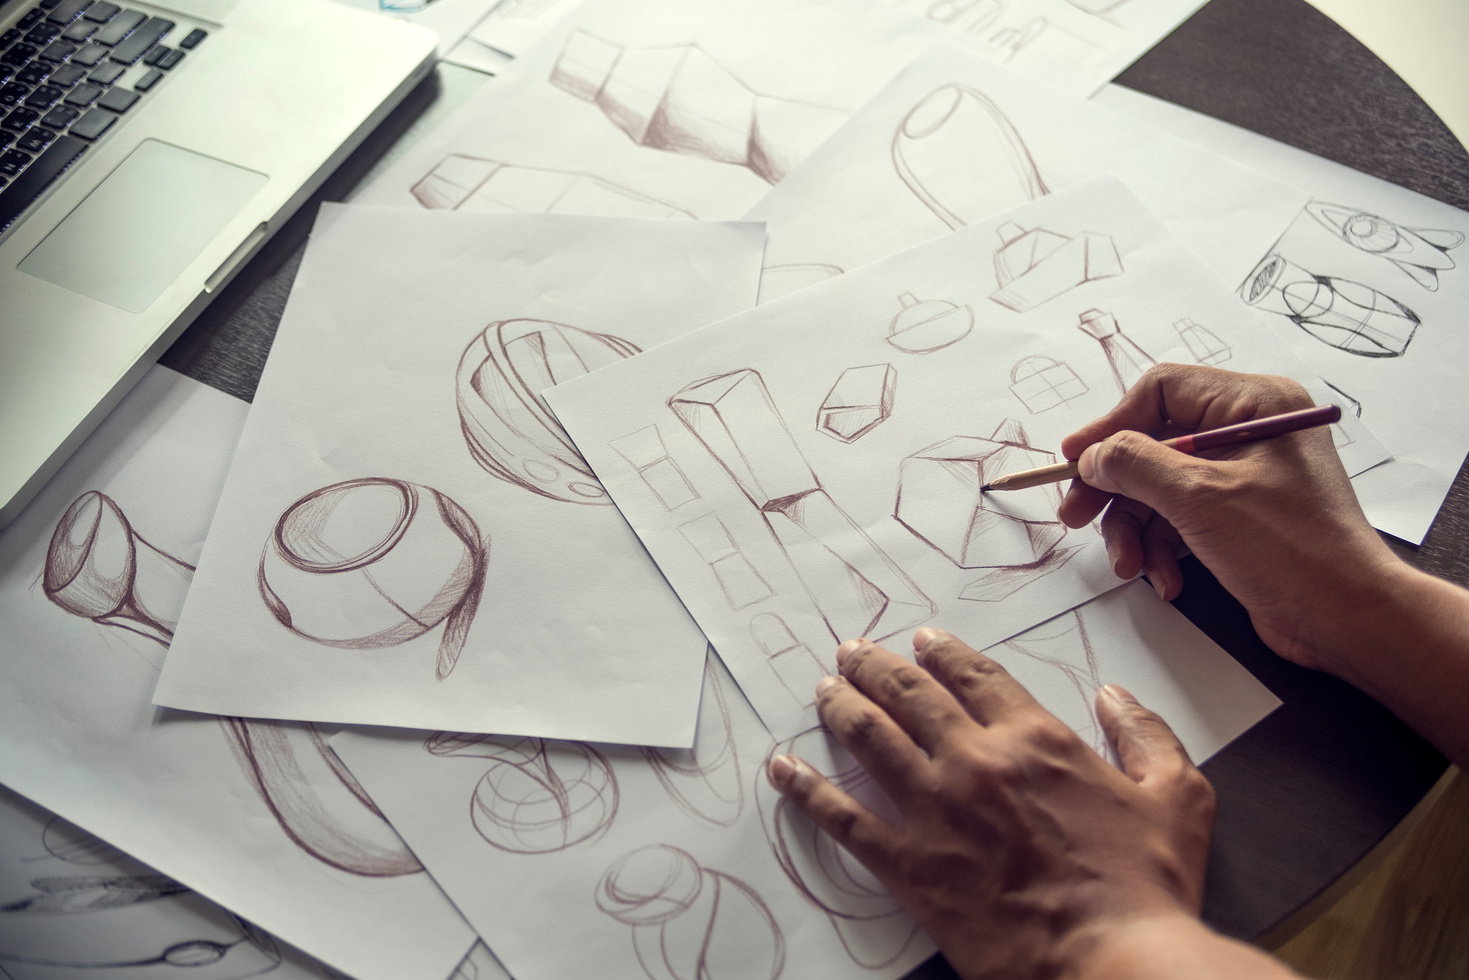 Production designer sketching Drawing Development Design product packaging prototype idea Creative Concept